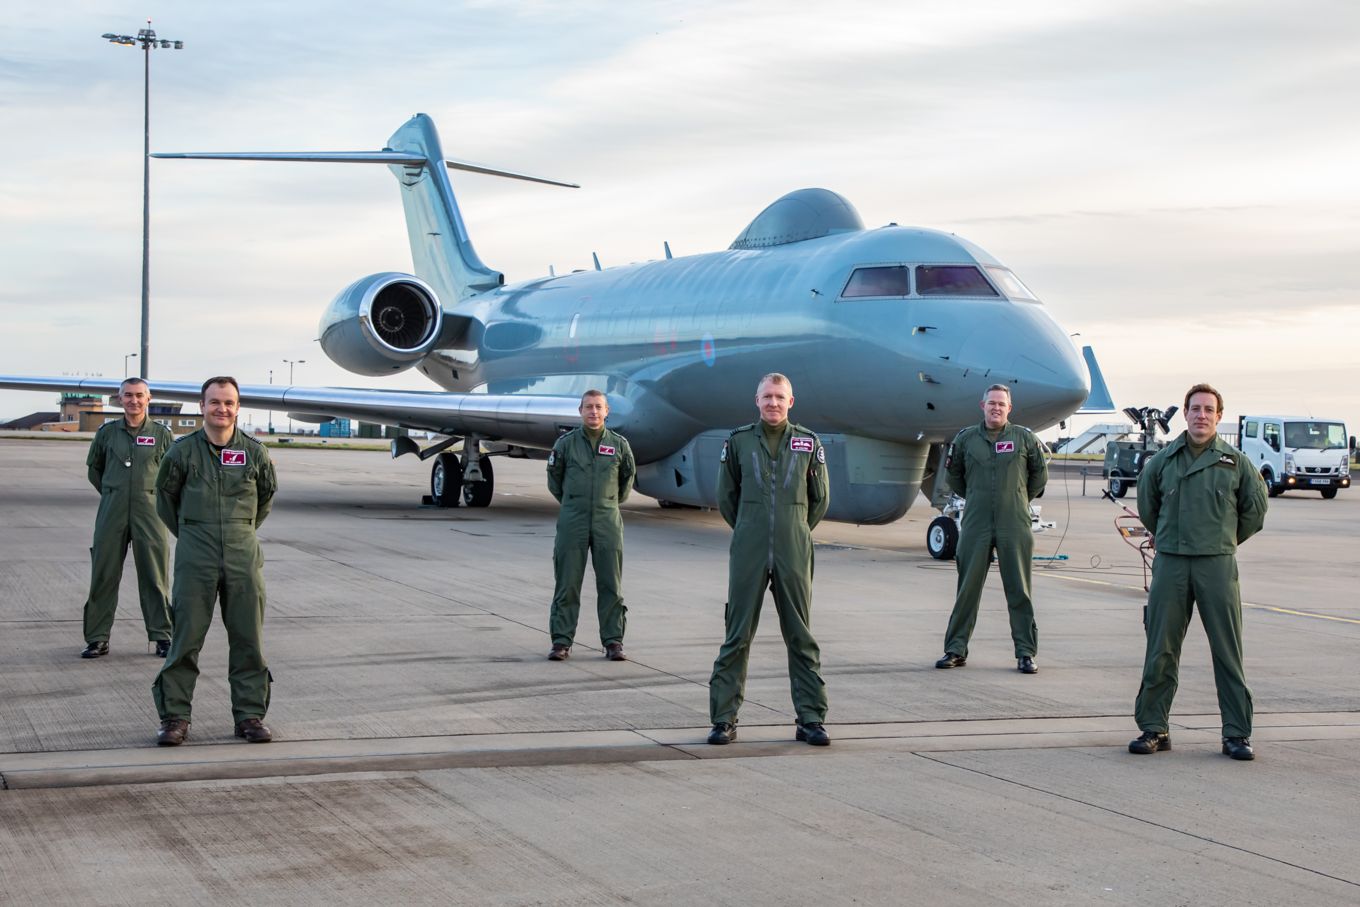 V(AC) Squadron Sentinel R1 crew and aircraft before leaving on the last sortie.